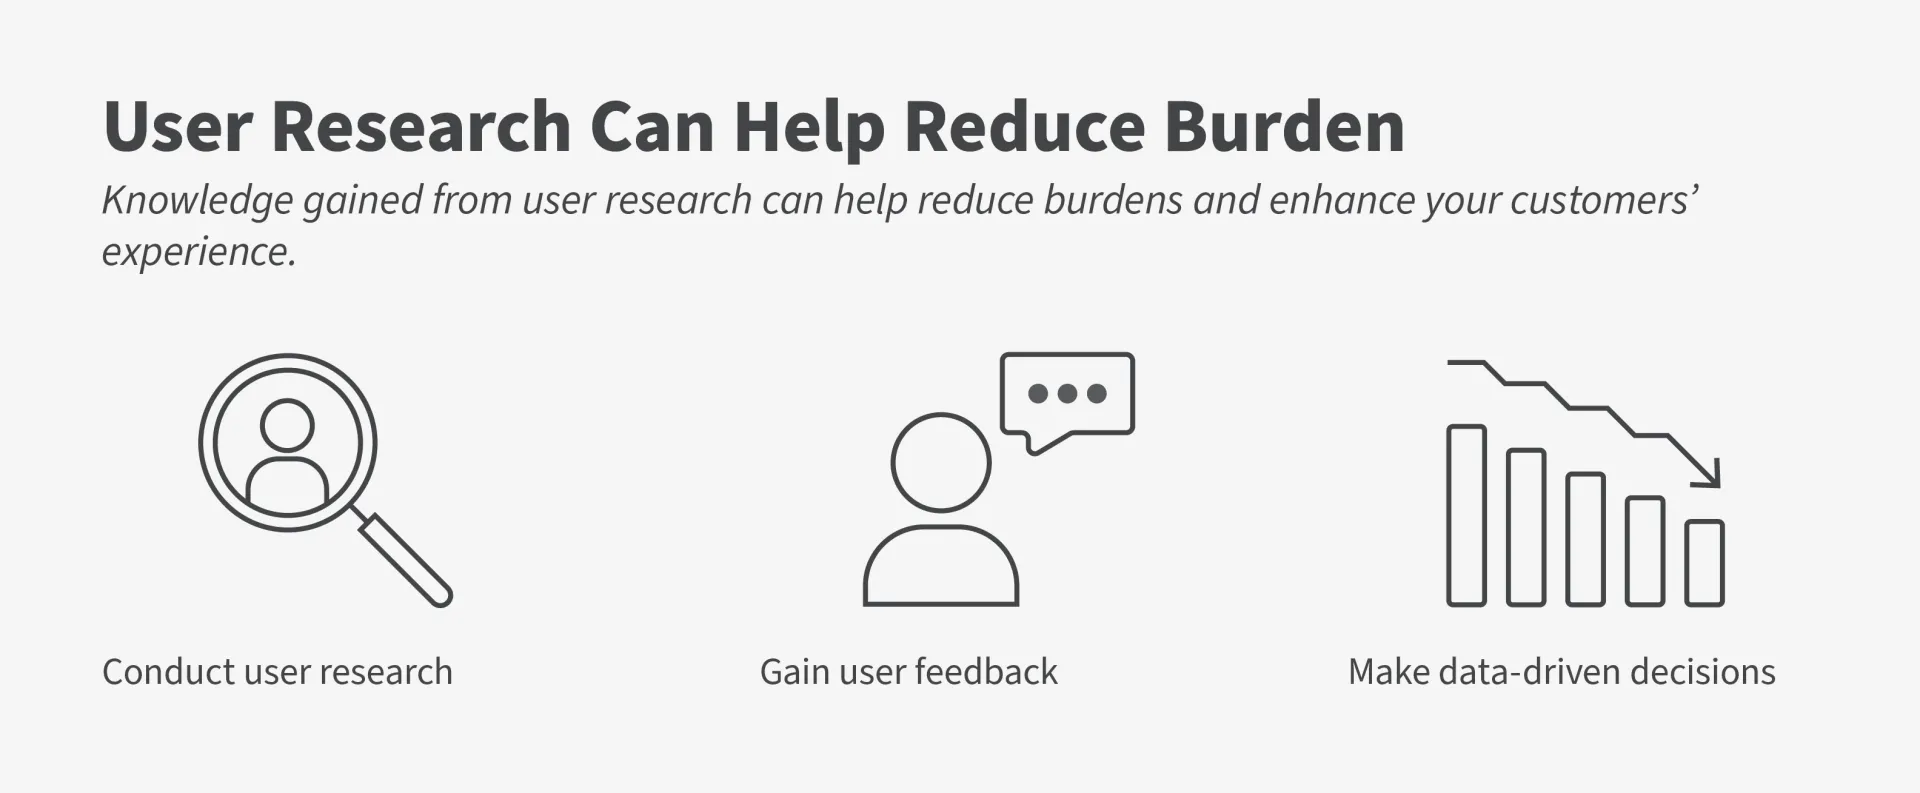 Infographic with three icons showing how user research can help reduce user burden with data-driven decisions.